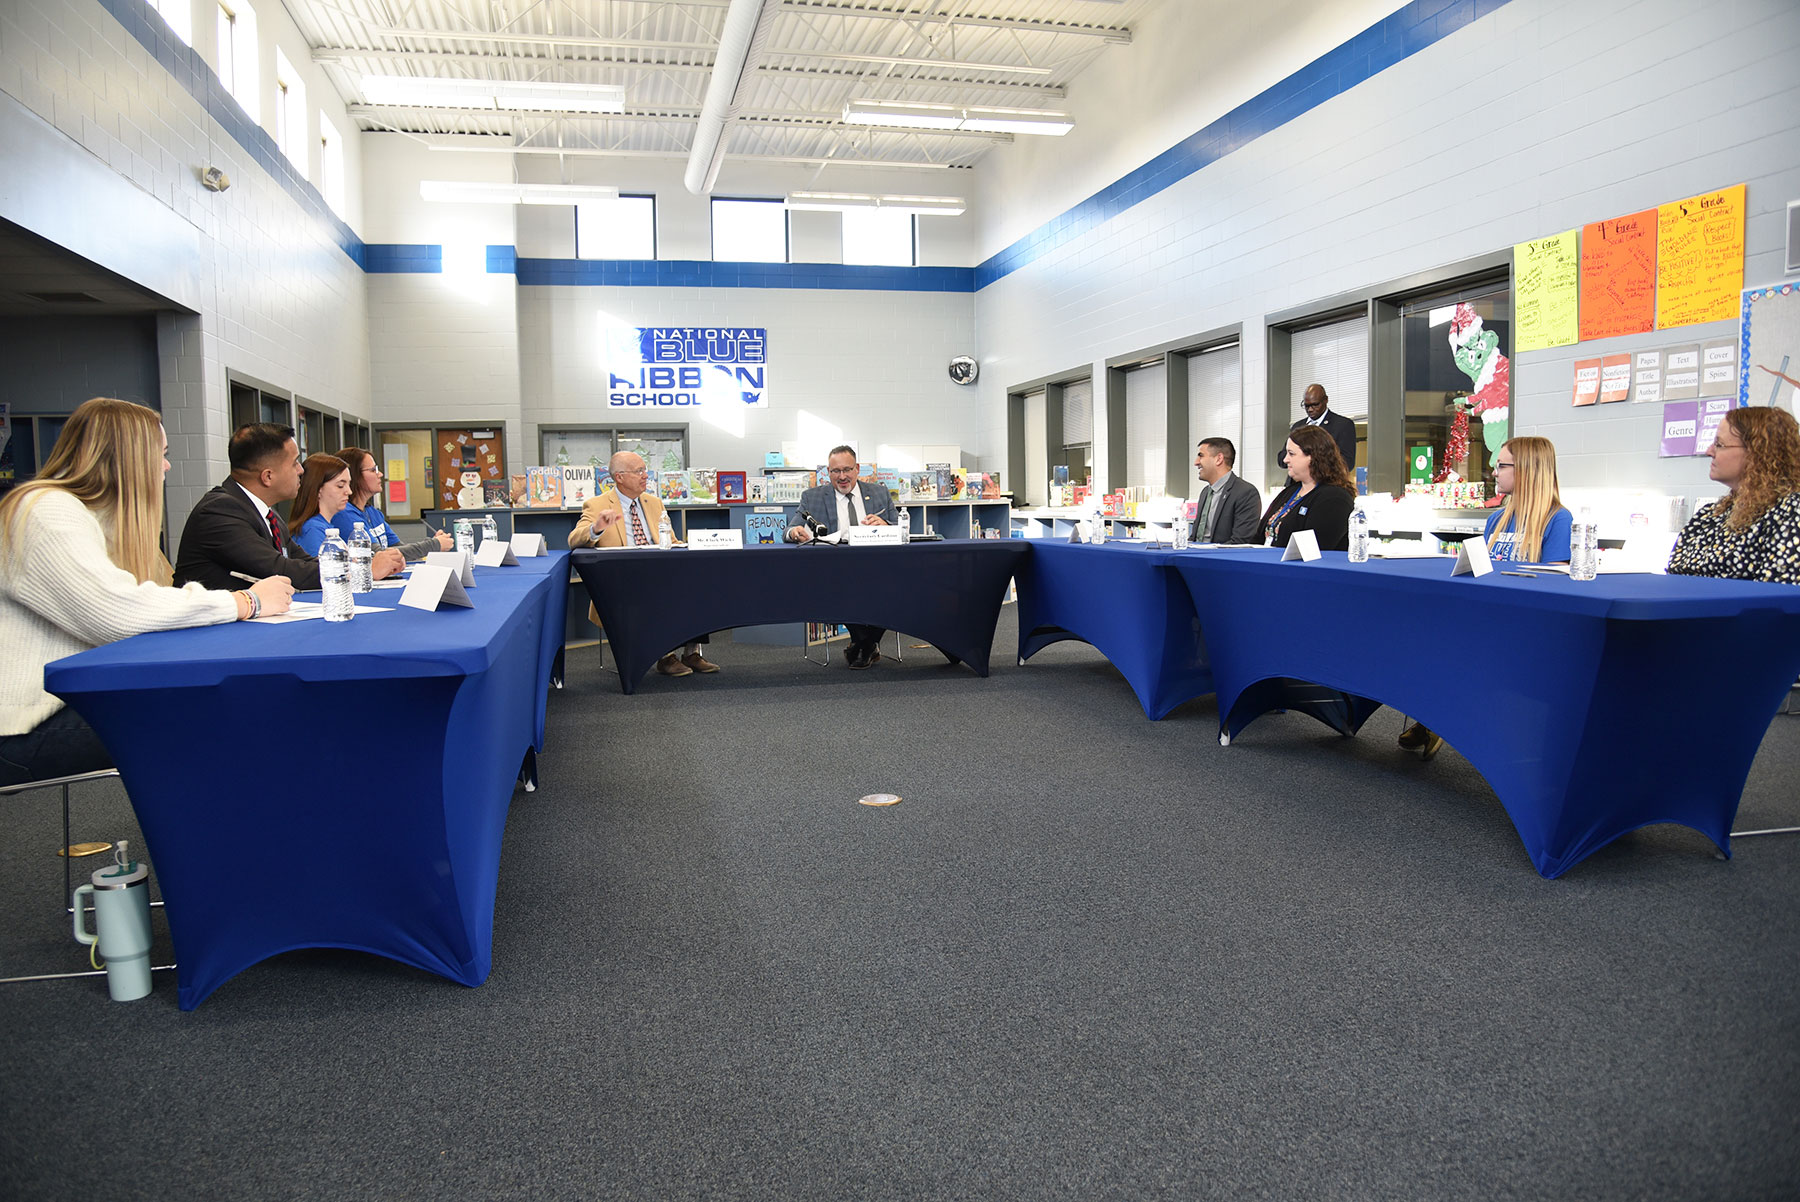 After taking a tour and visiting classrooms at Perry Elementary School, U.S. Secretary of Education Dr. Miguel Cardona participates in a 45-minute roundtable discussion focused on the nationwide shortage of teachers, as well as on Perry's successful paraeducator-teacher apprenticeship program and partnership with DMACC.